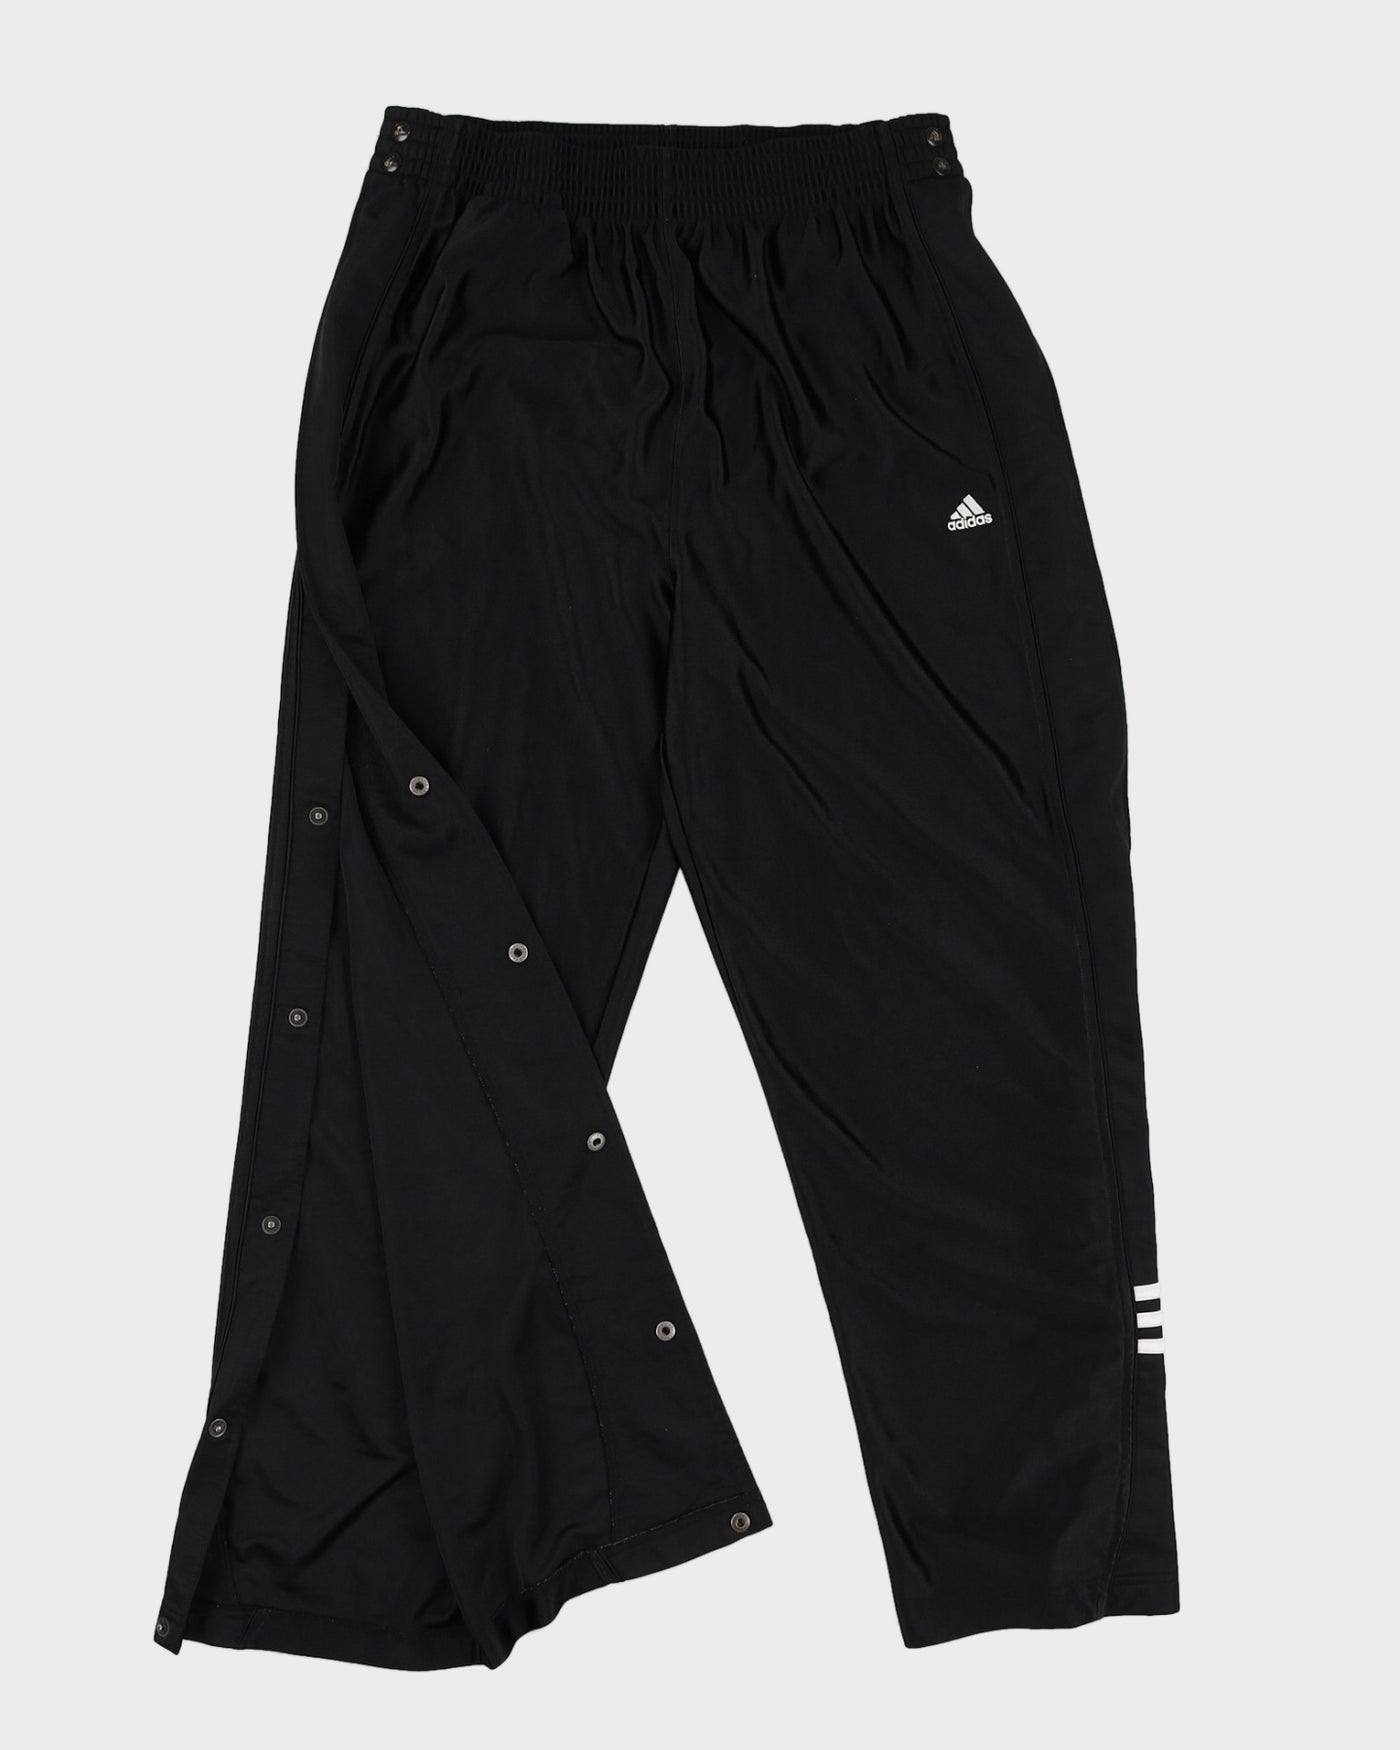 00s Adidas Black Buttoned Up Track Bottoms - W36 L31